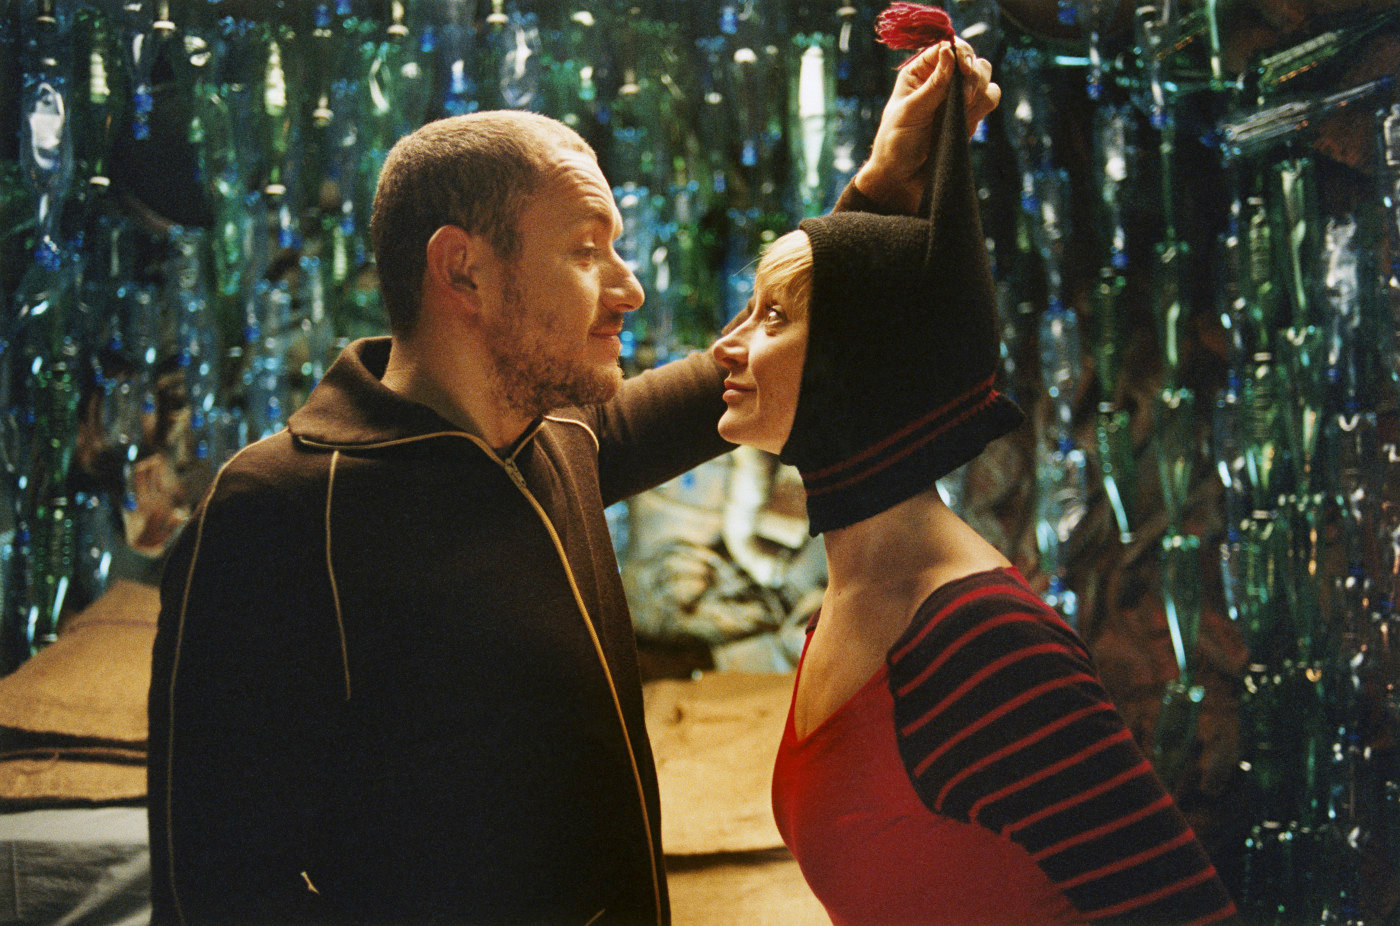 Dany Boon stars as Bazil and Julie Ferrier stars as La Mome Caoutchouc in Sony Pictures Classics' Micmacs (2010)